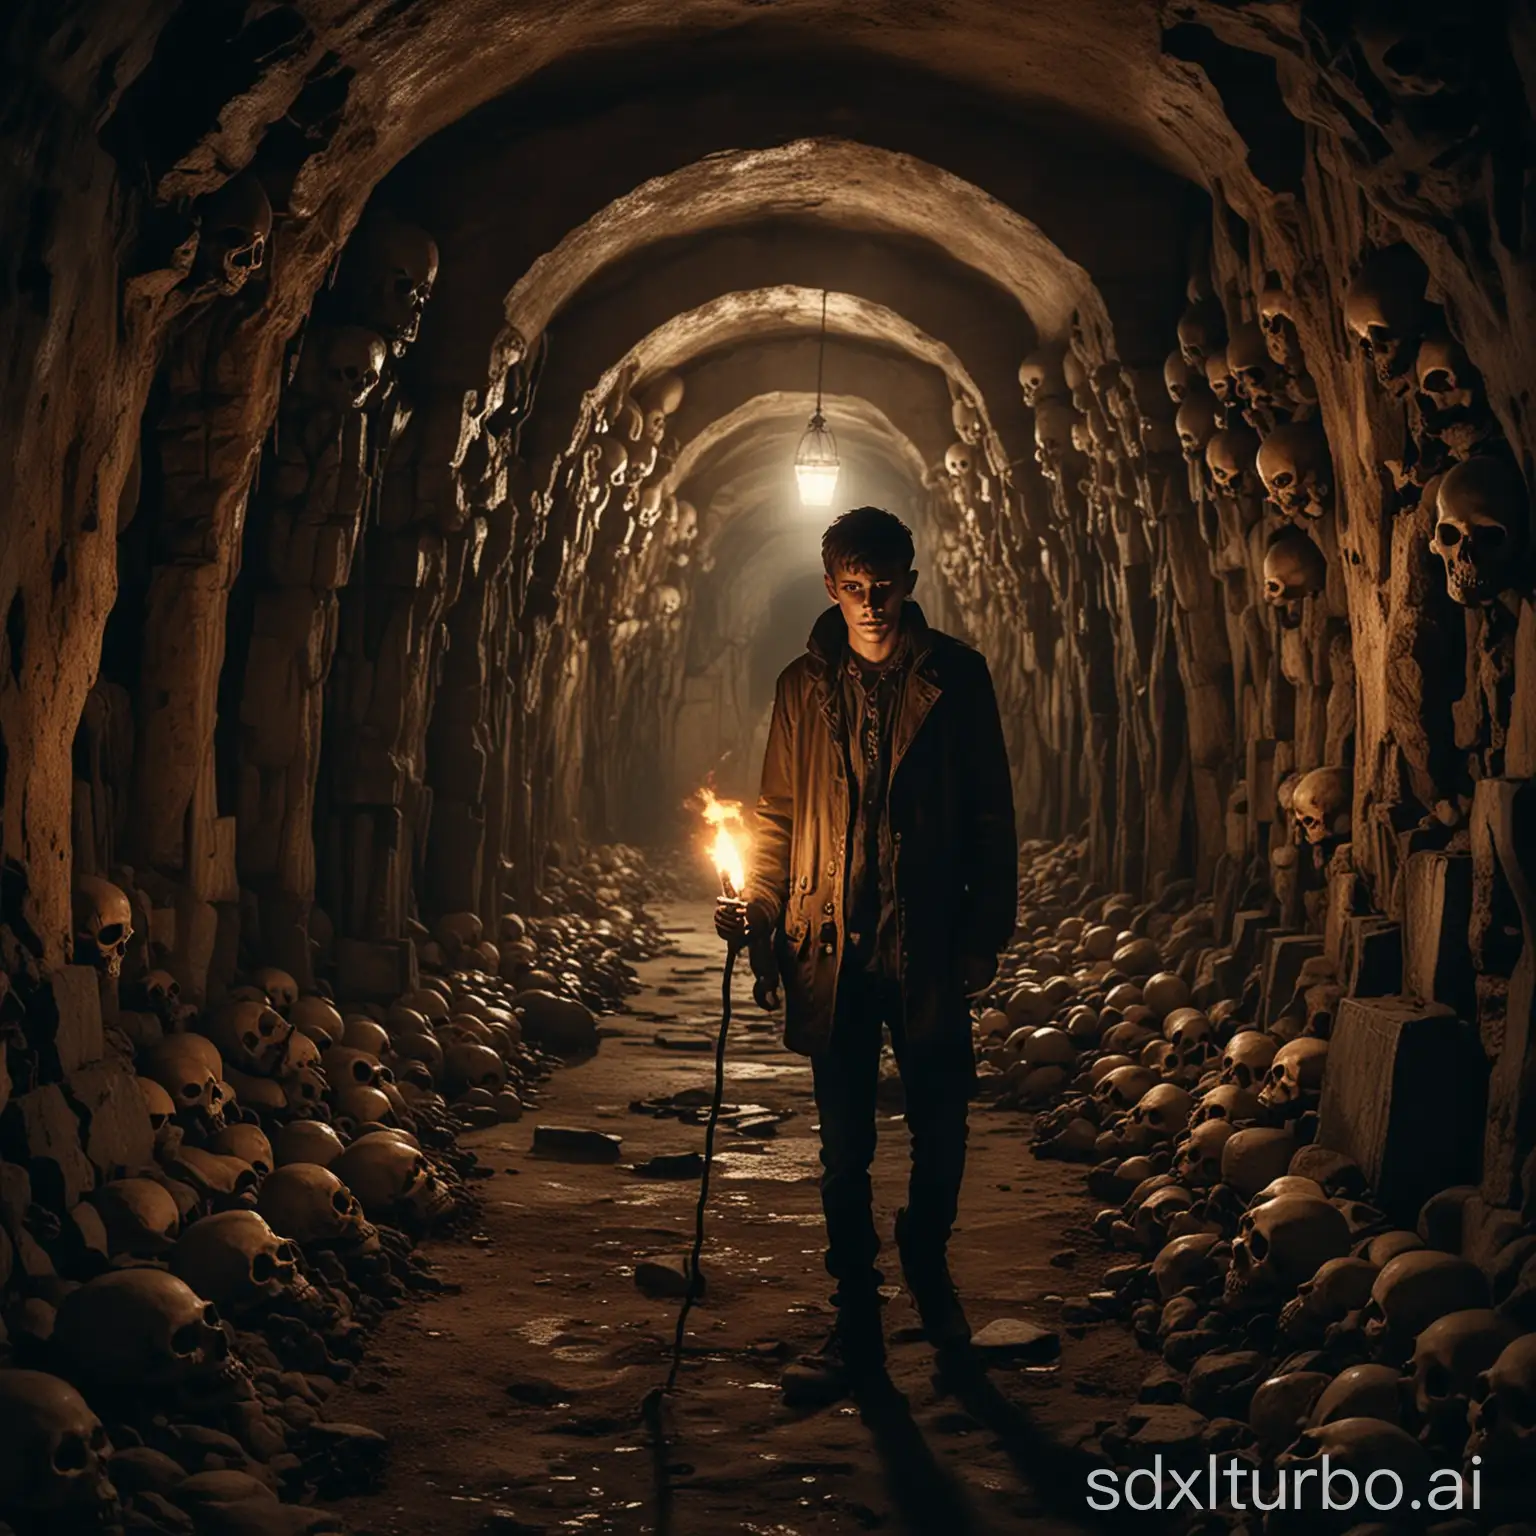 Create a square, 1:1 aspect ratio, high definition, image of a true scary Paris catacombs story. The image must be photorealistic, scary, show a full body shot of a very scared young man in dimly lit catacombs, skulls, terrified young man, casual attire, holding a torch in a hand, alone, body pose about to escape, avoiding attack, atmospheric, dark, scary catacombs full of skulls, vivid colors, cinematic, catchy, must pop and catch attention, wide shot. Not a monster, no monstrous faces.